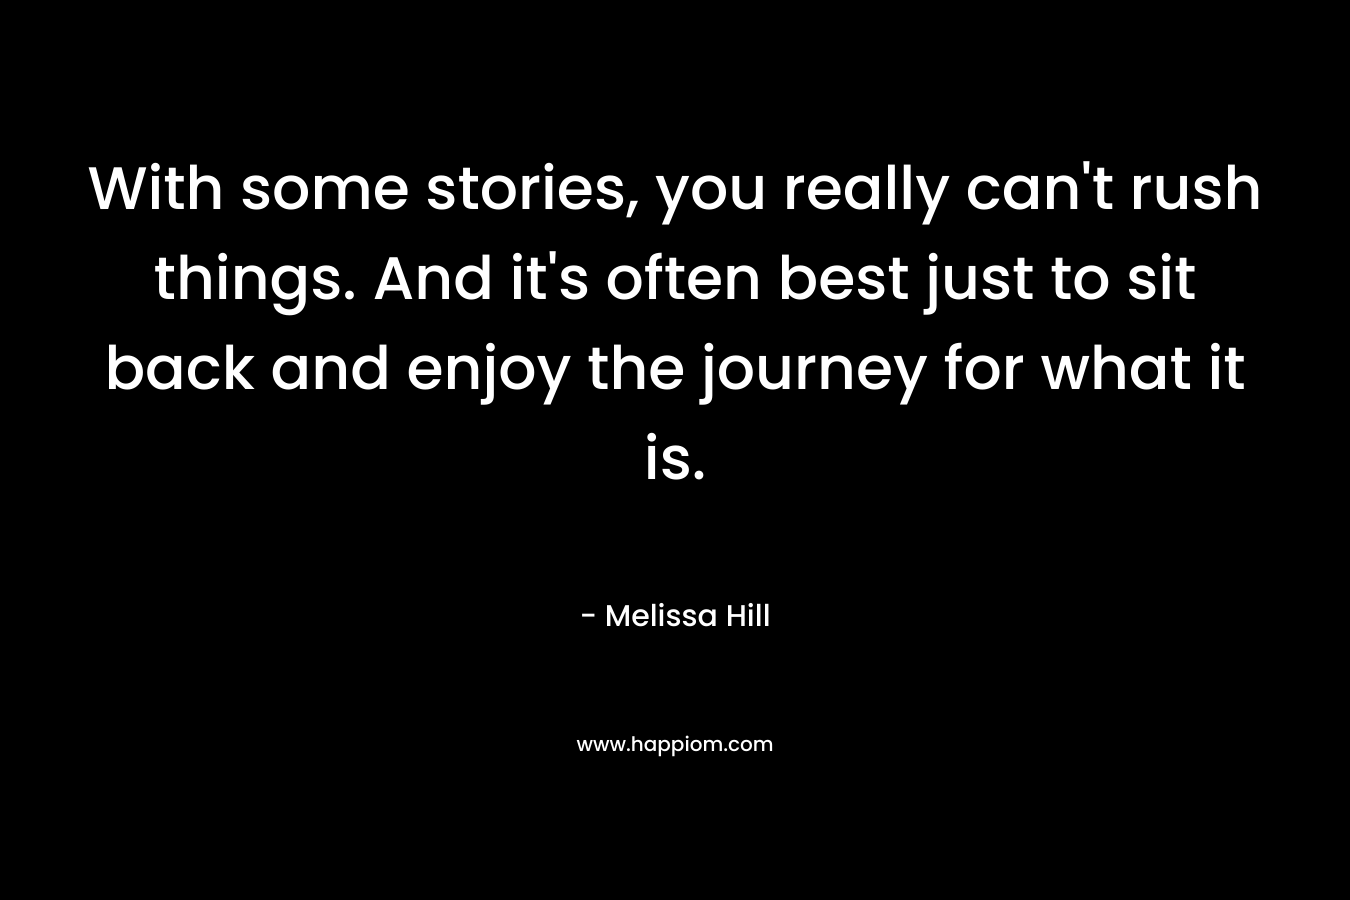 With some stories, you really can’t rush things. And it’s often best just to sit back and enjoy the journey for what it is. – Melissa Hill